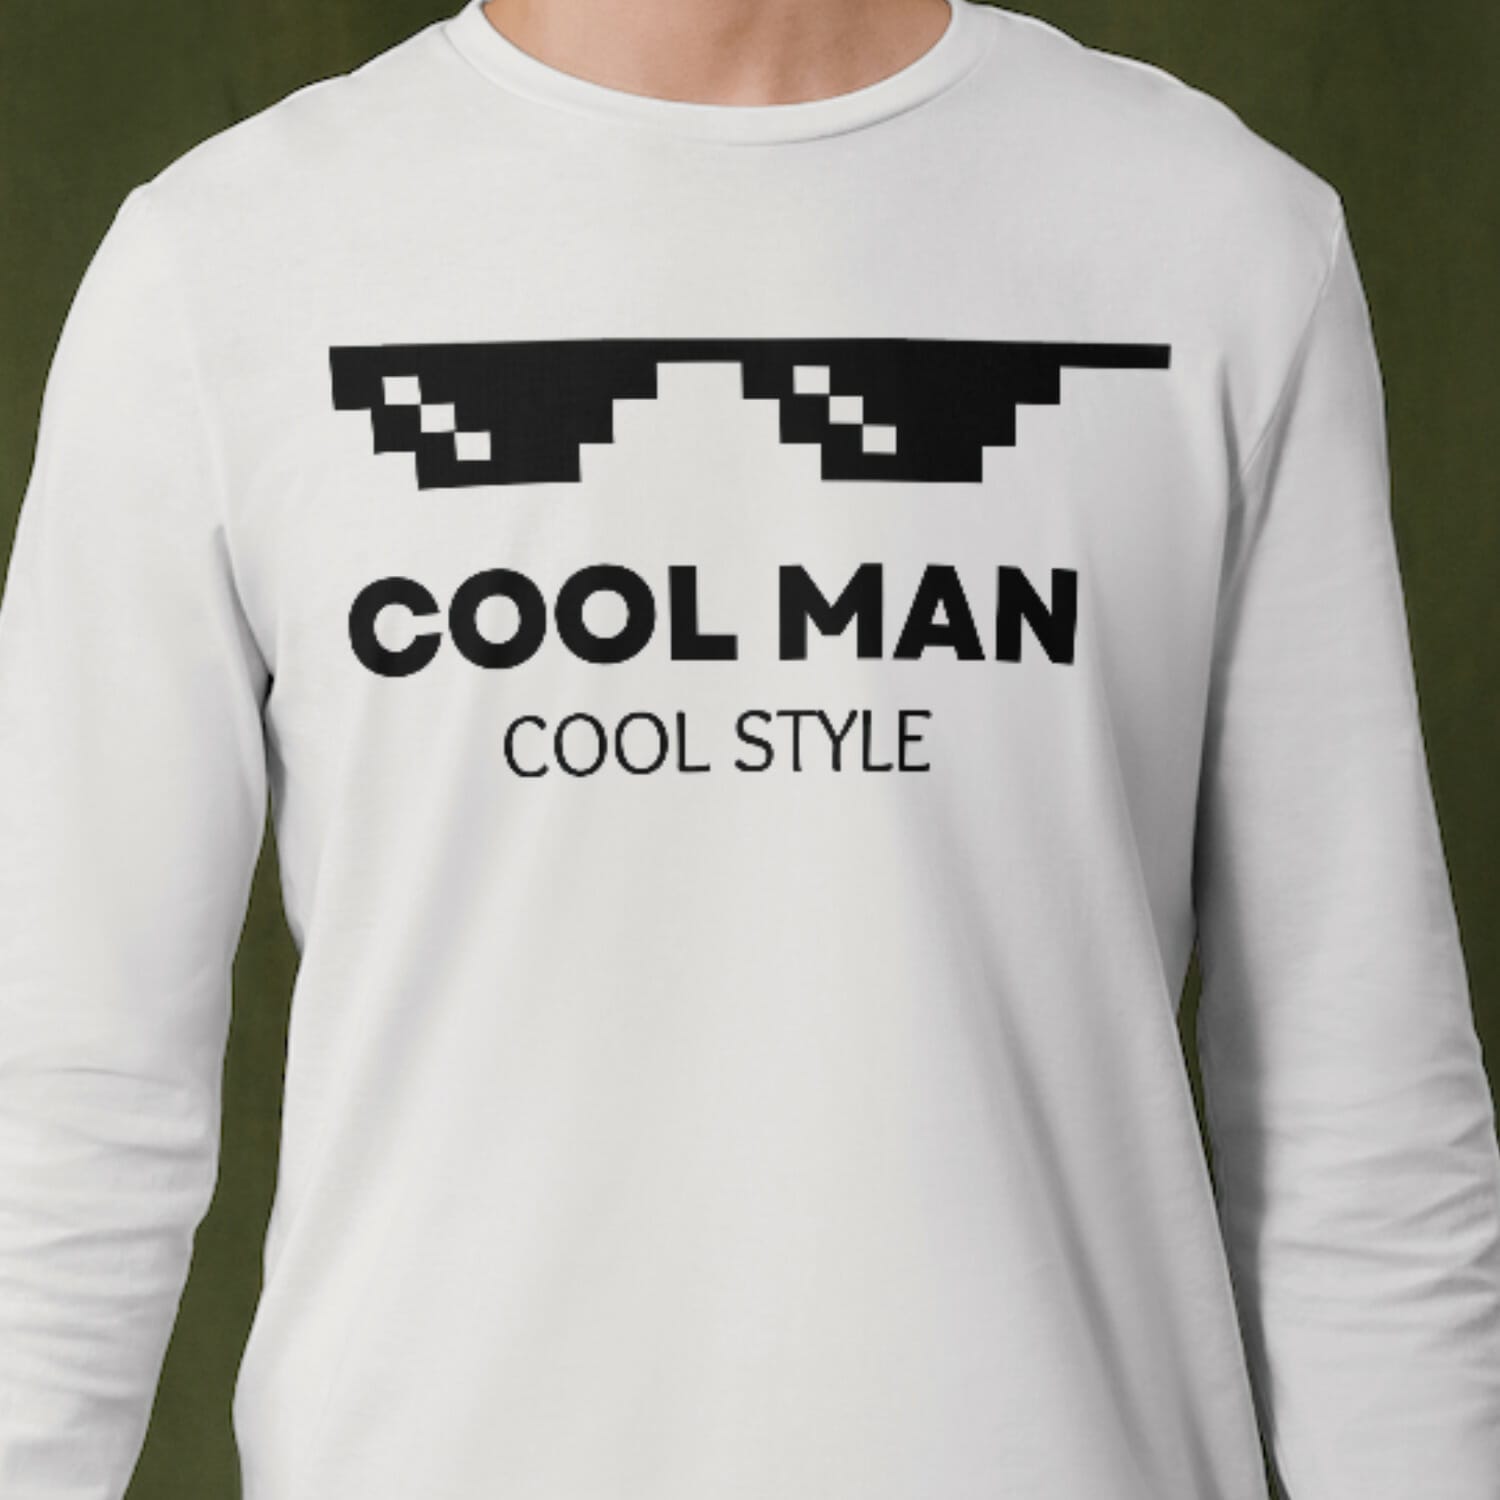 Free Design For T shirt Printing Cool man cool style